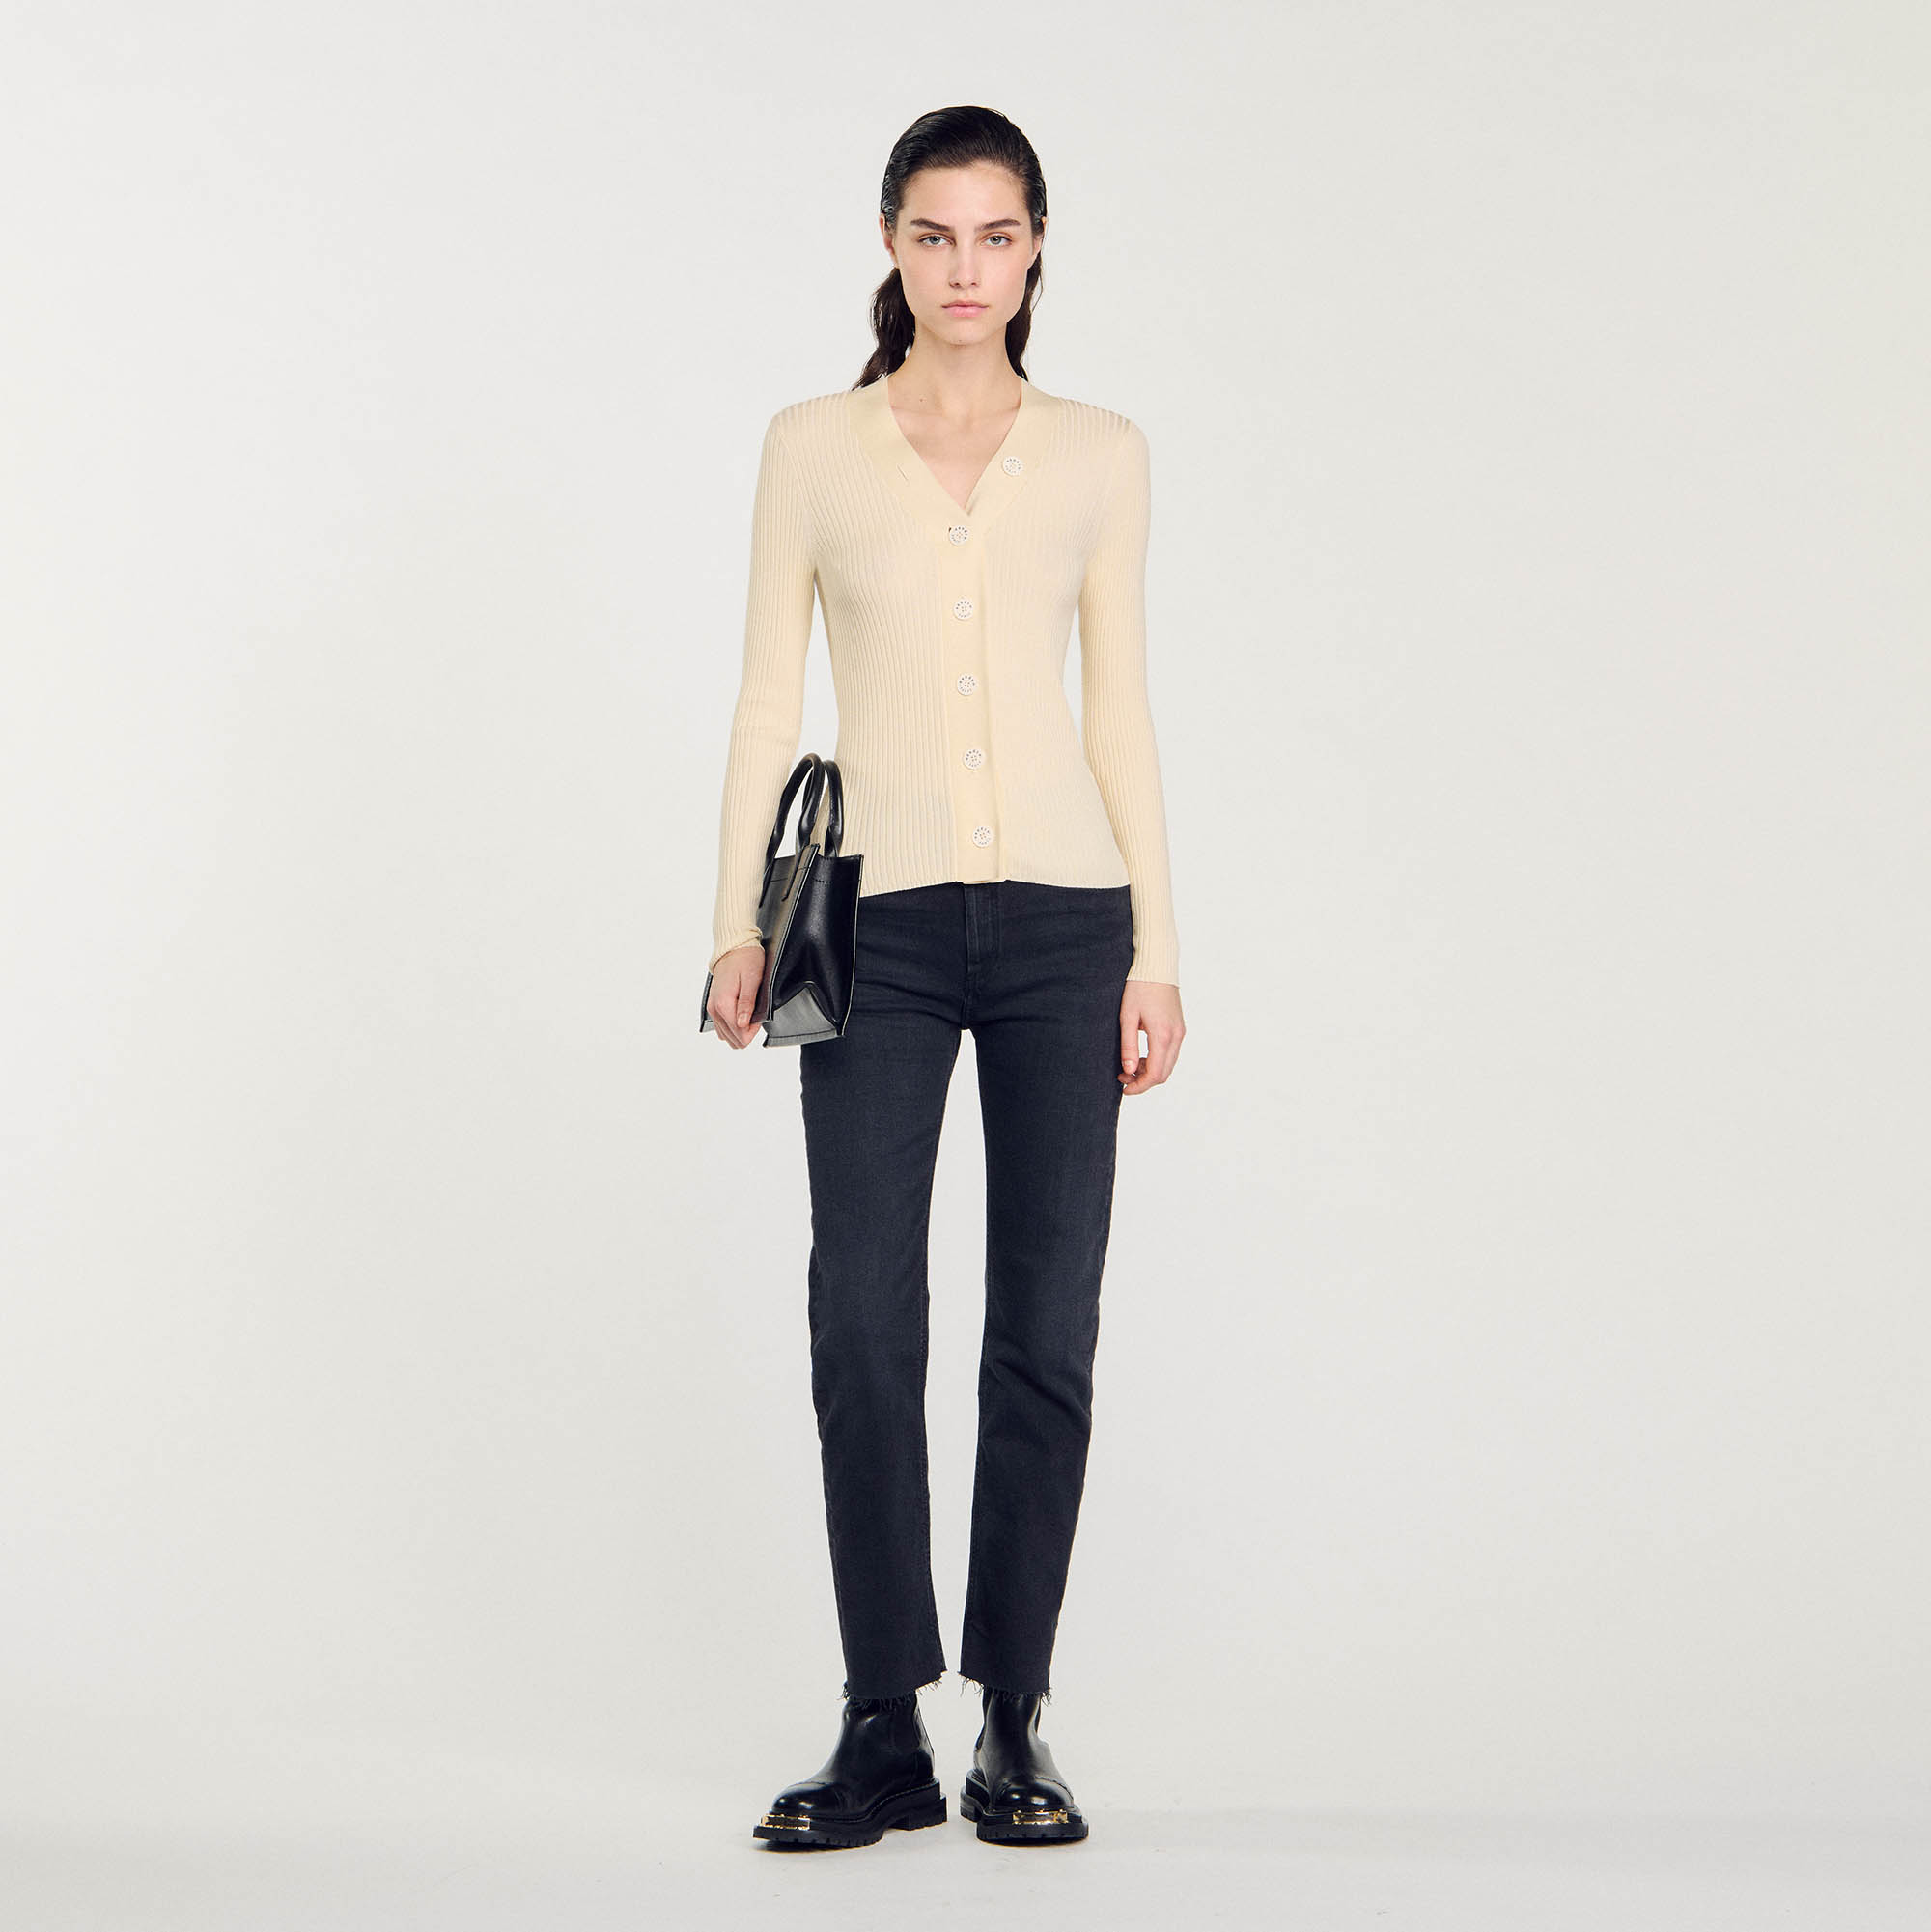 Sandro viscose Fine ribbed knit cardigan with a V-neck, long sleeves, and a button fastening